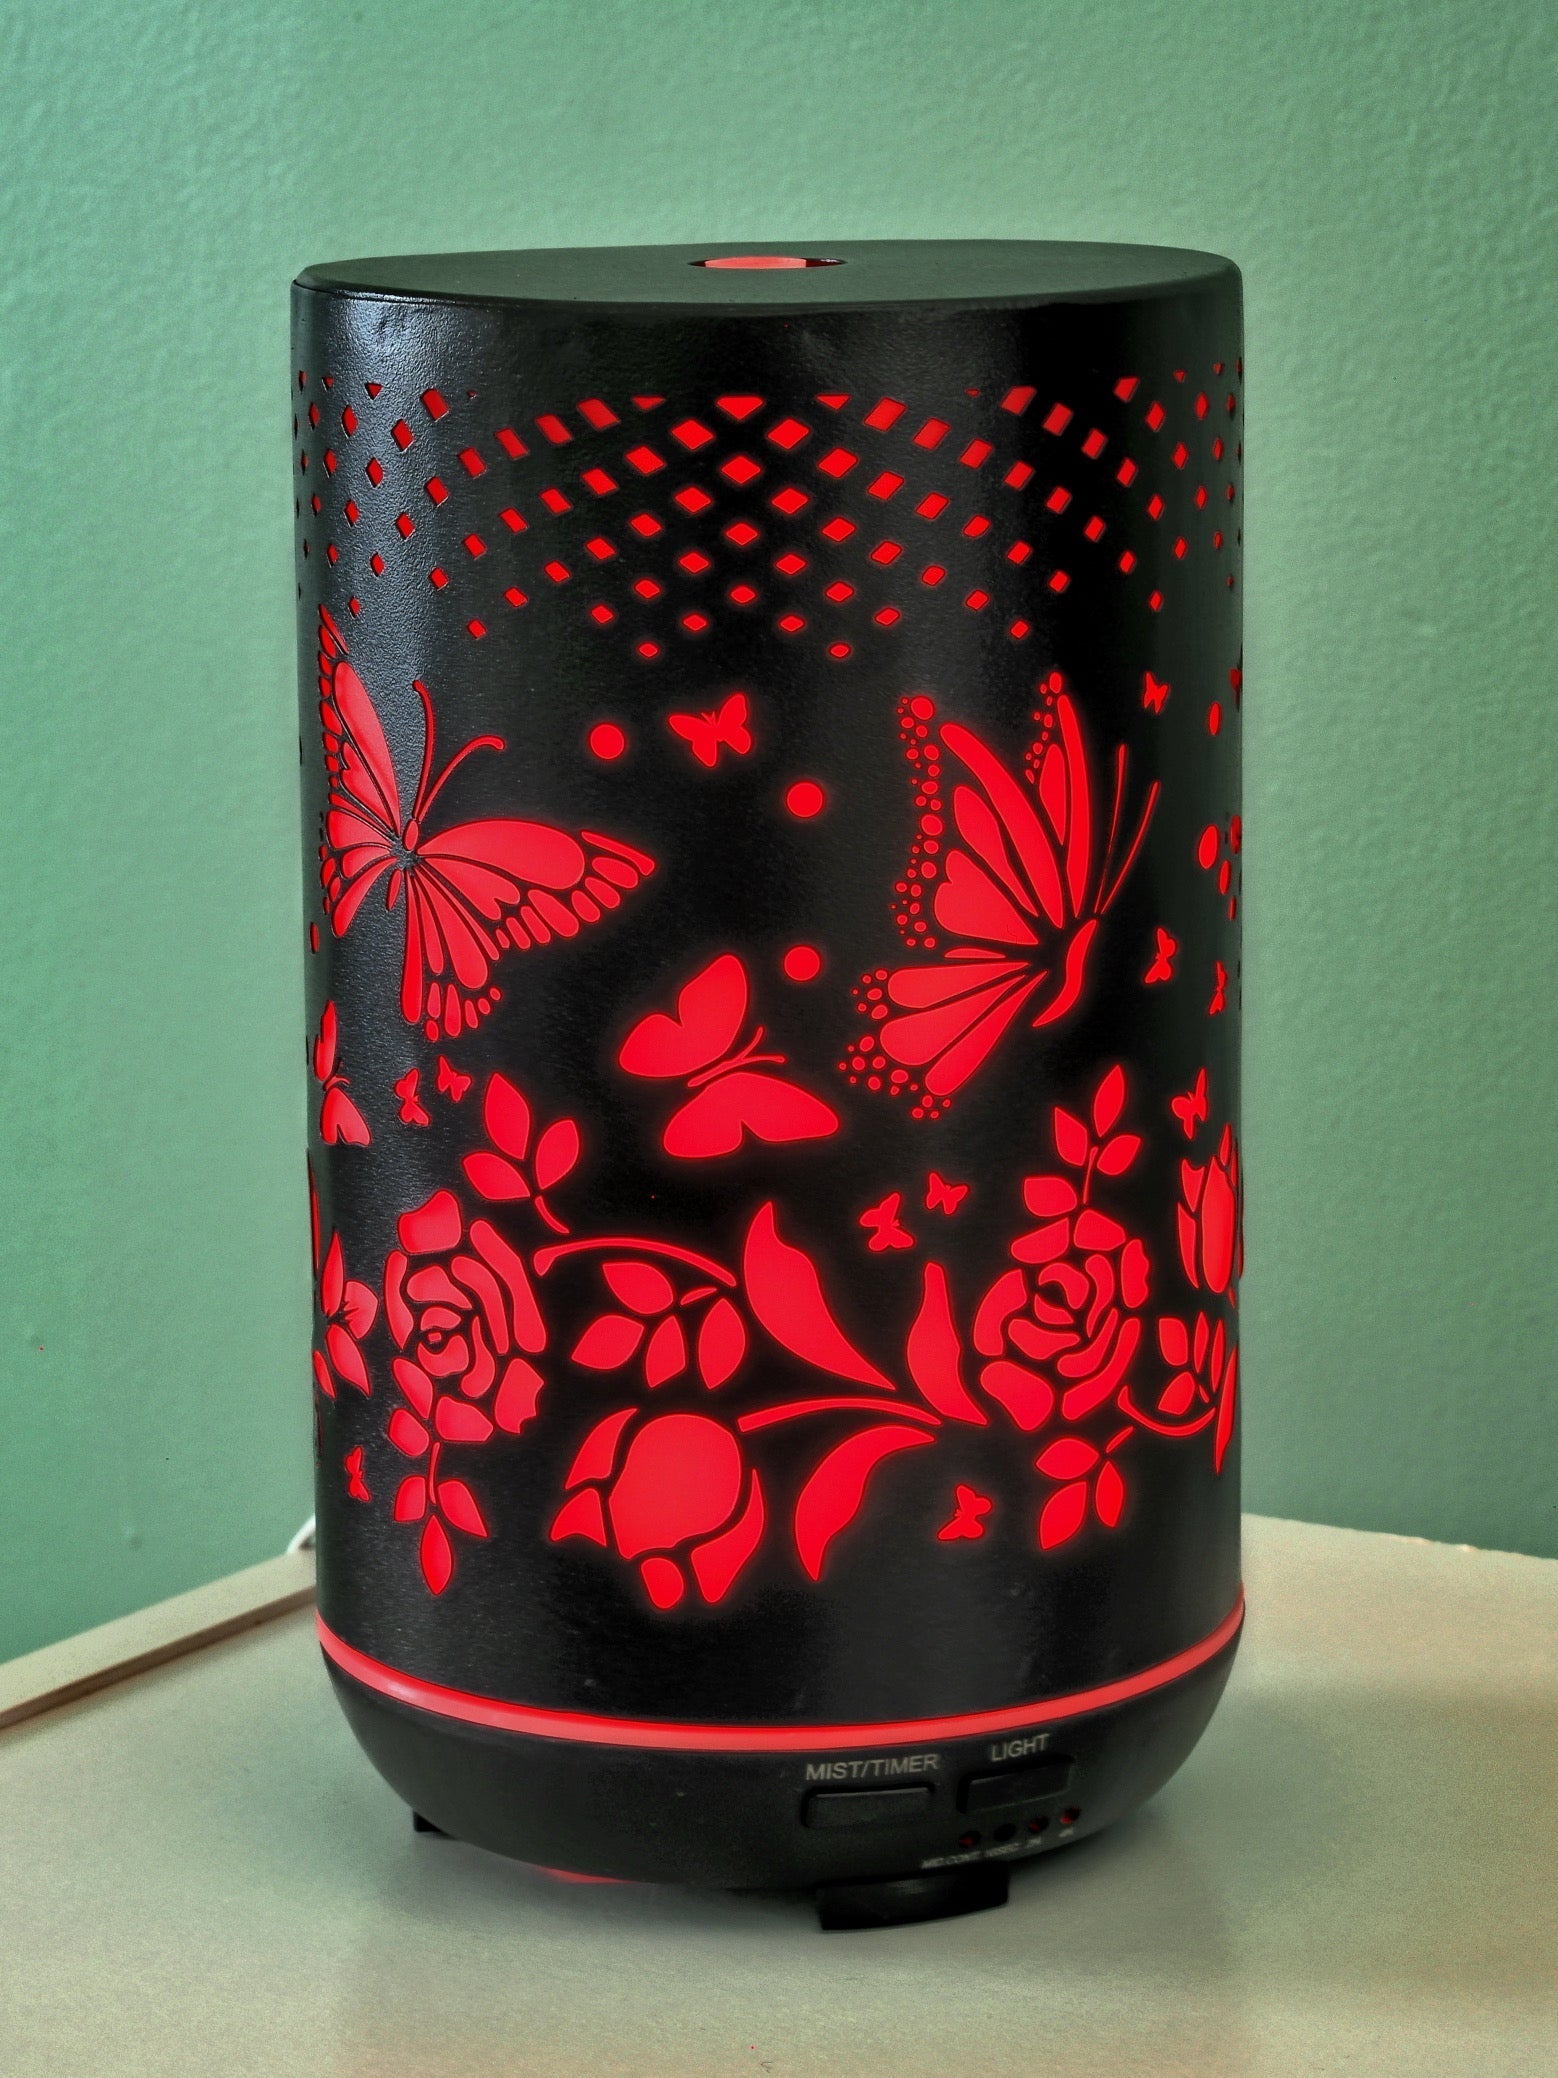 Elegant Flower Aroma Diffuser for Relaxing Aromatherapy by Ancient Infusions.